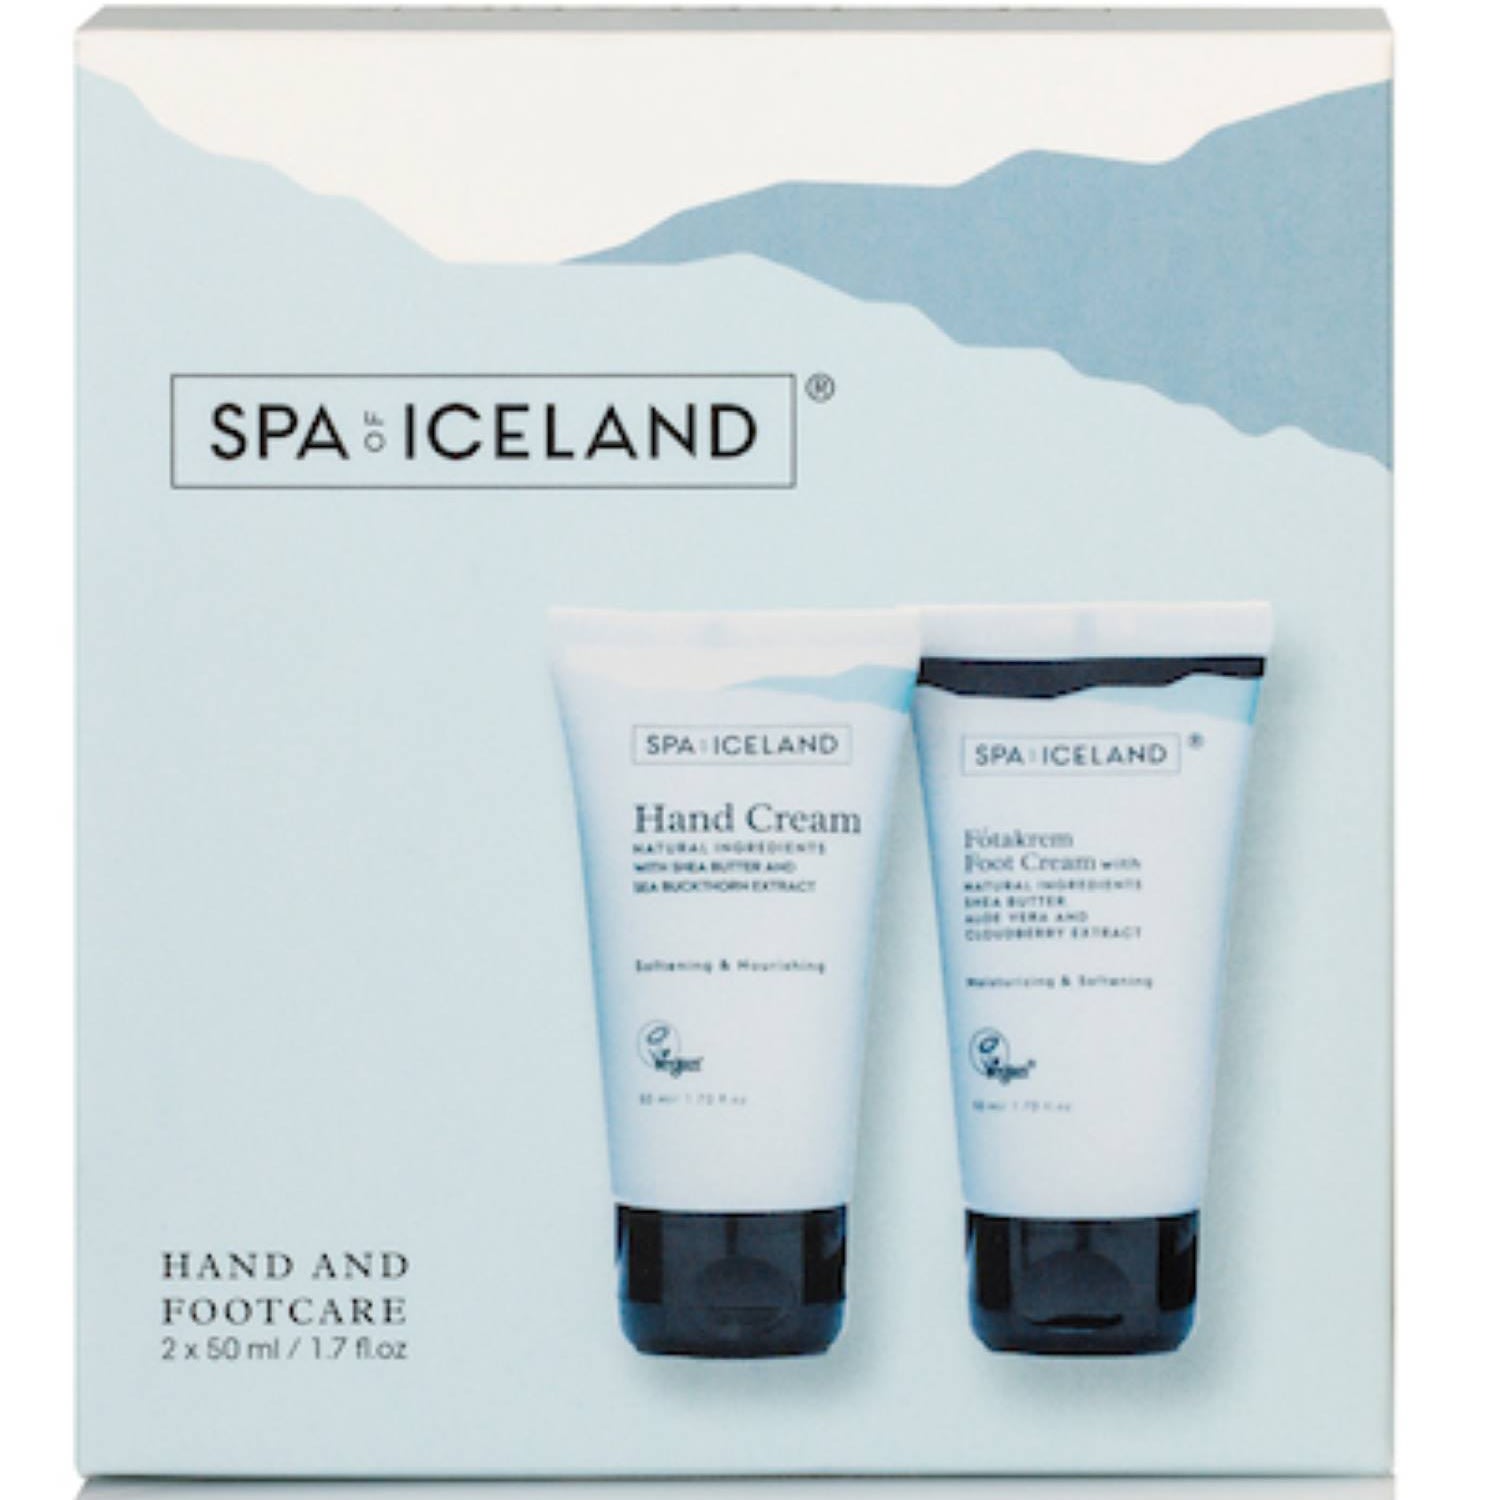 SPA of ICELAND - Spa Of Iceland Giftset With Hand Cream & Foot Cream